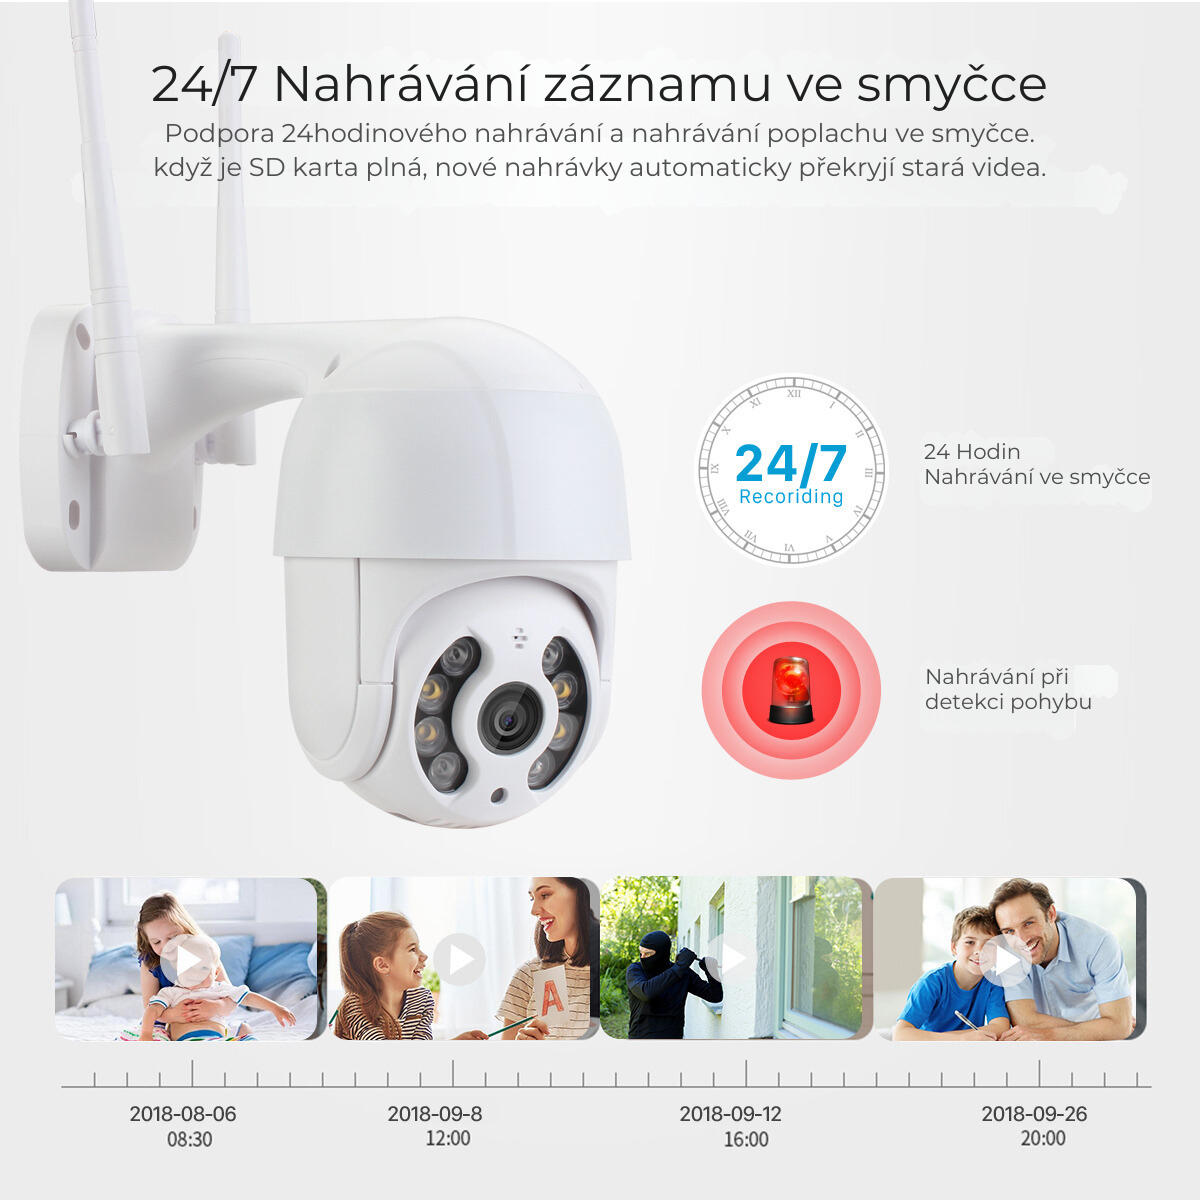 Smart Video Recording & Playback Support 24 hours Loop Recording and Alarm Recording together when the Sd card is full, new recordings will cover old videos automatically